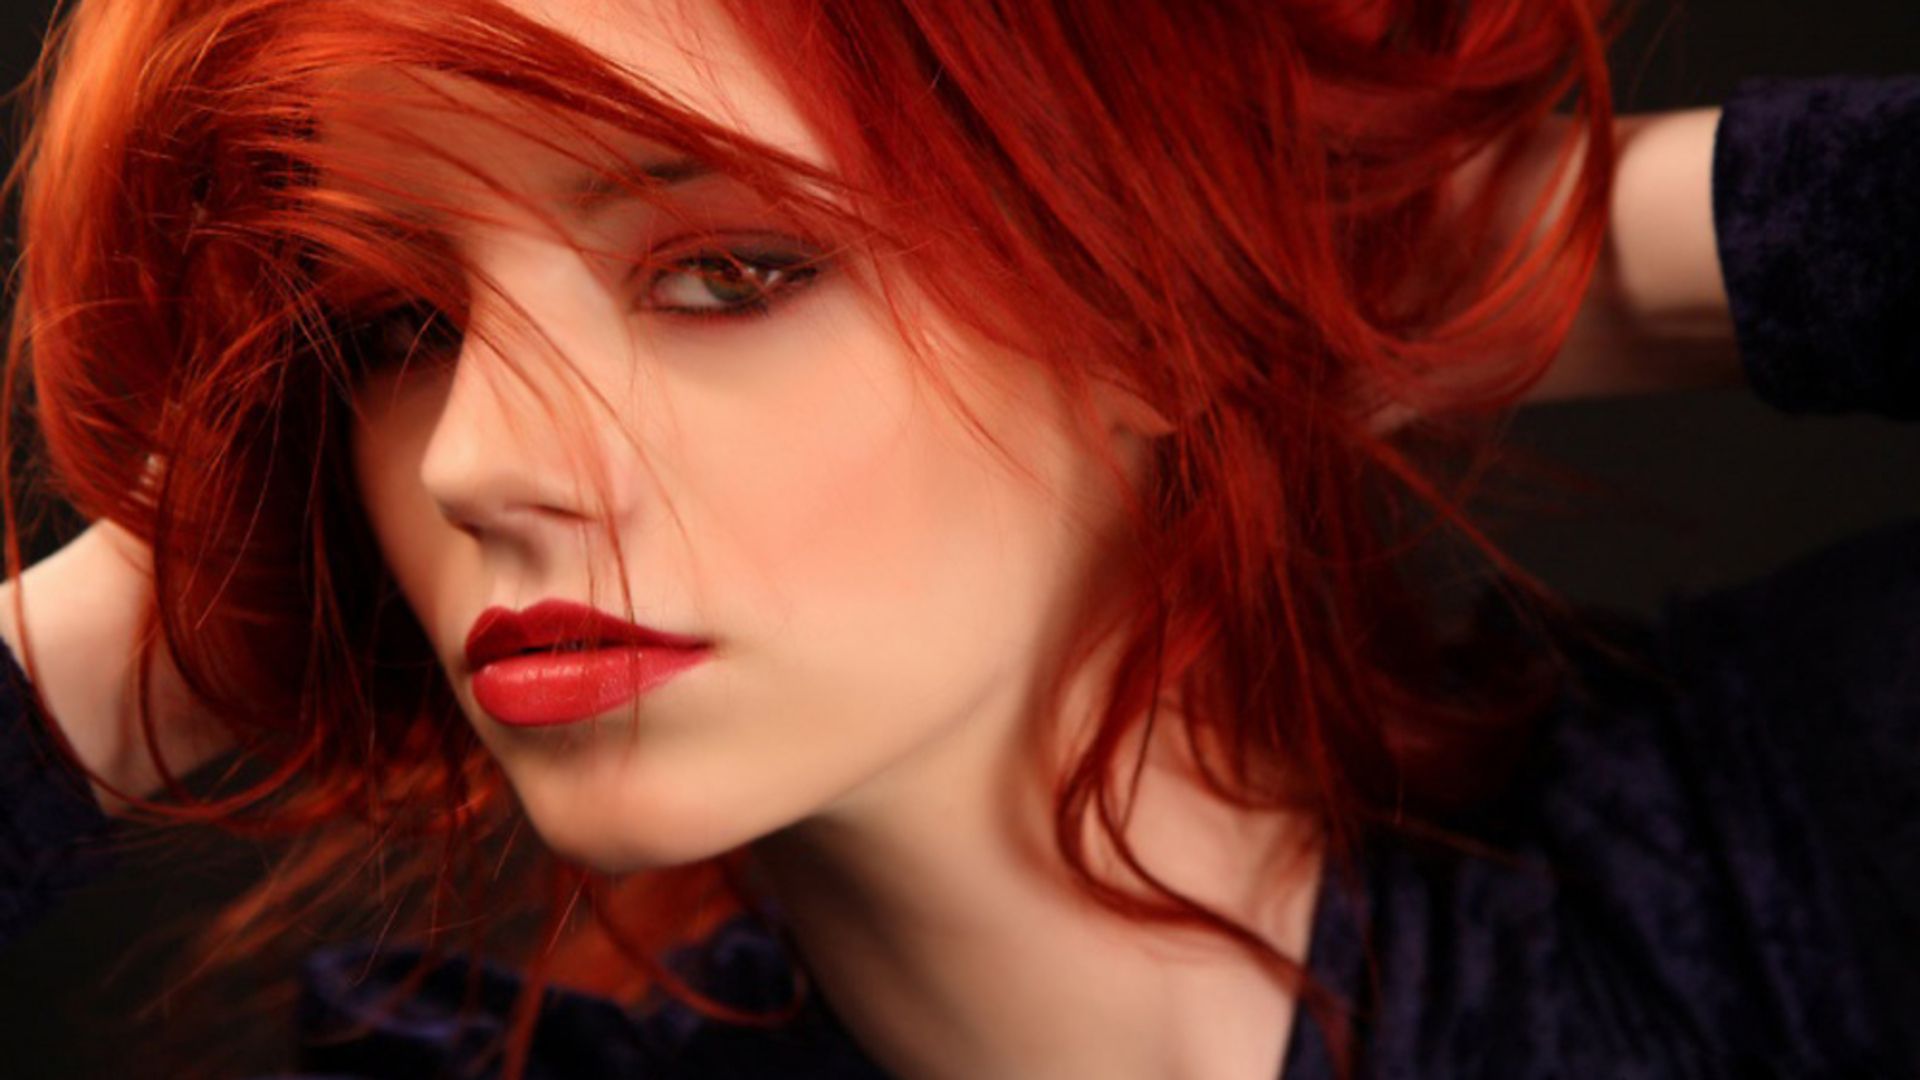 Best Red Images On Pinterest Redheads Red Heads And Ginger Hair 2